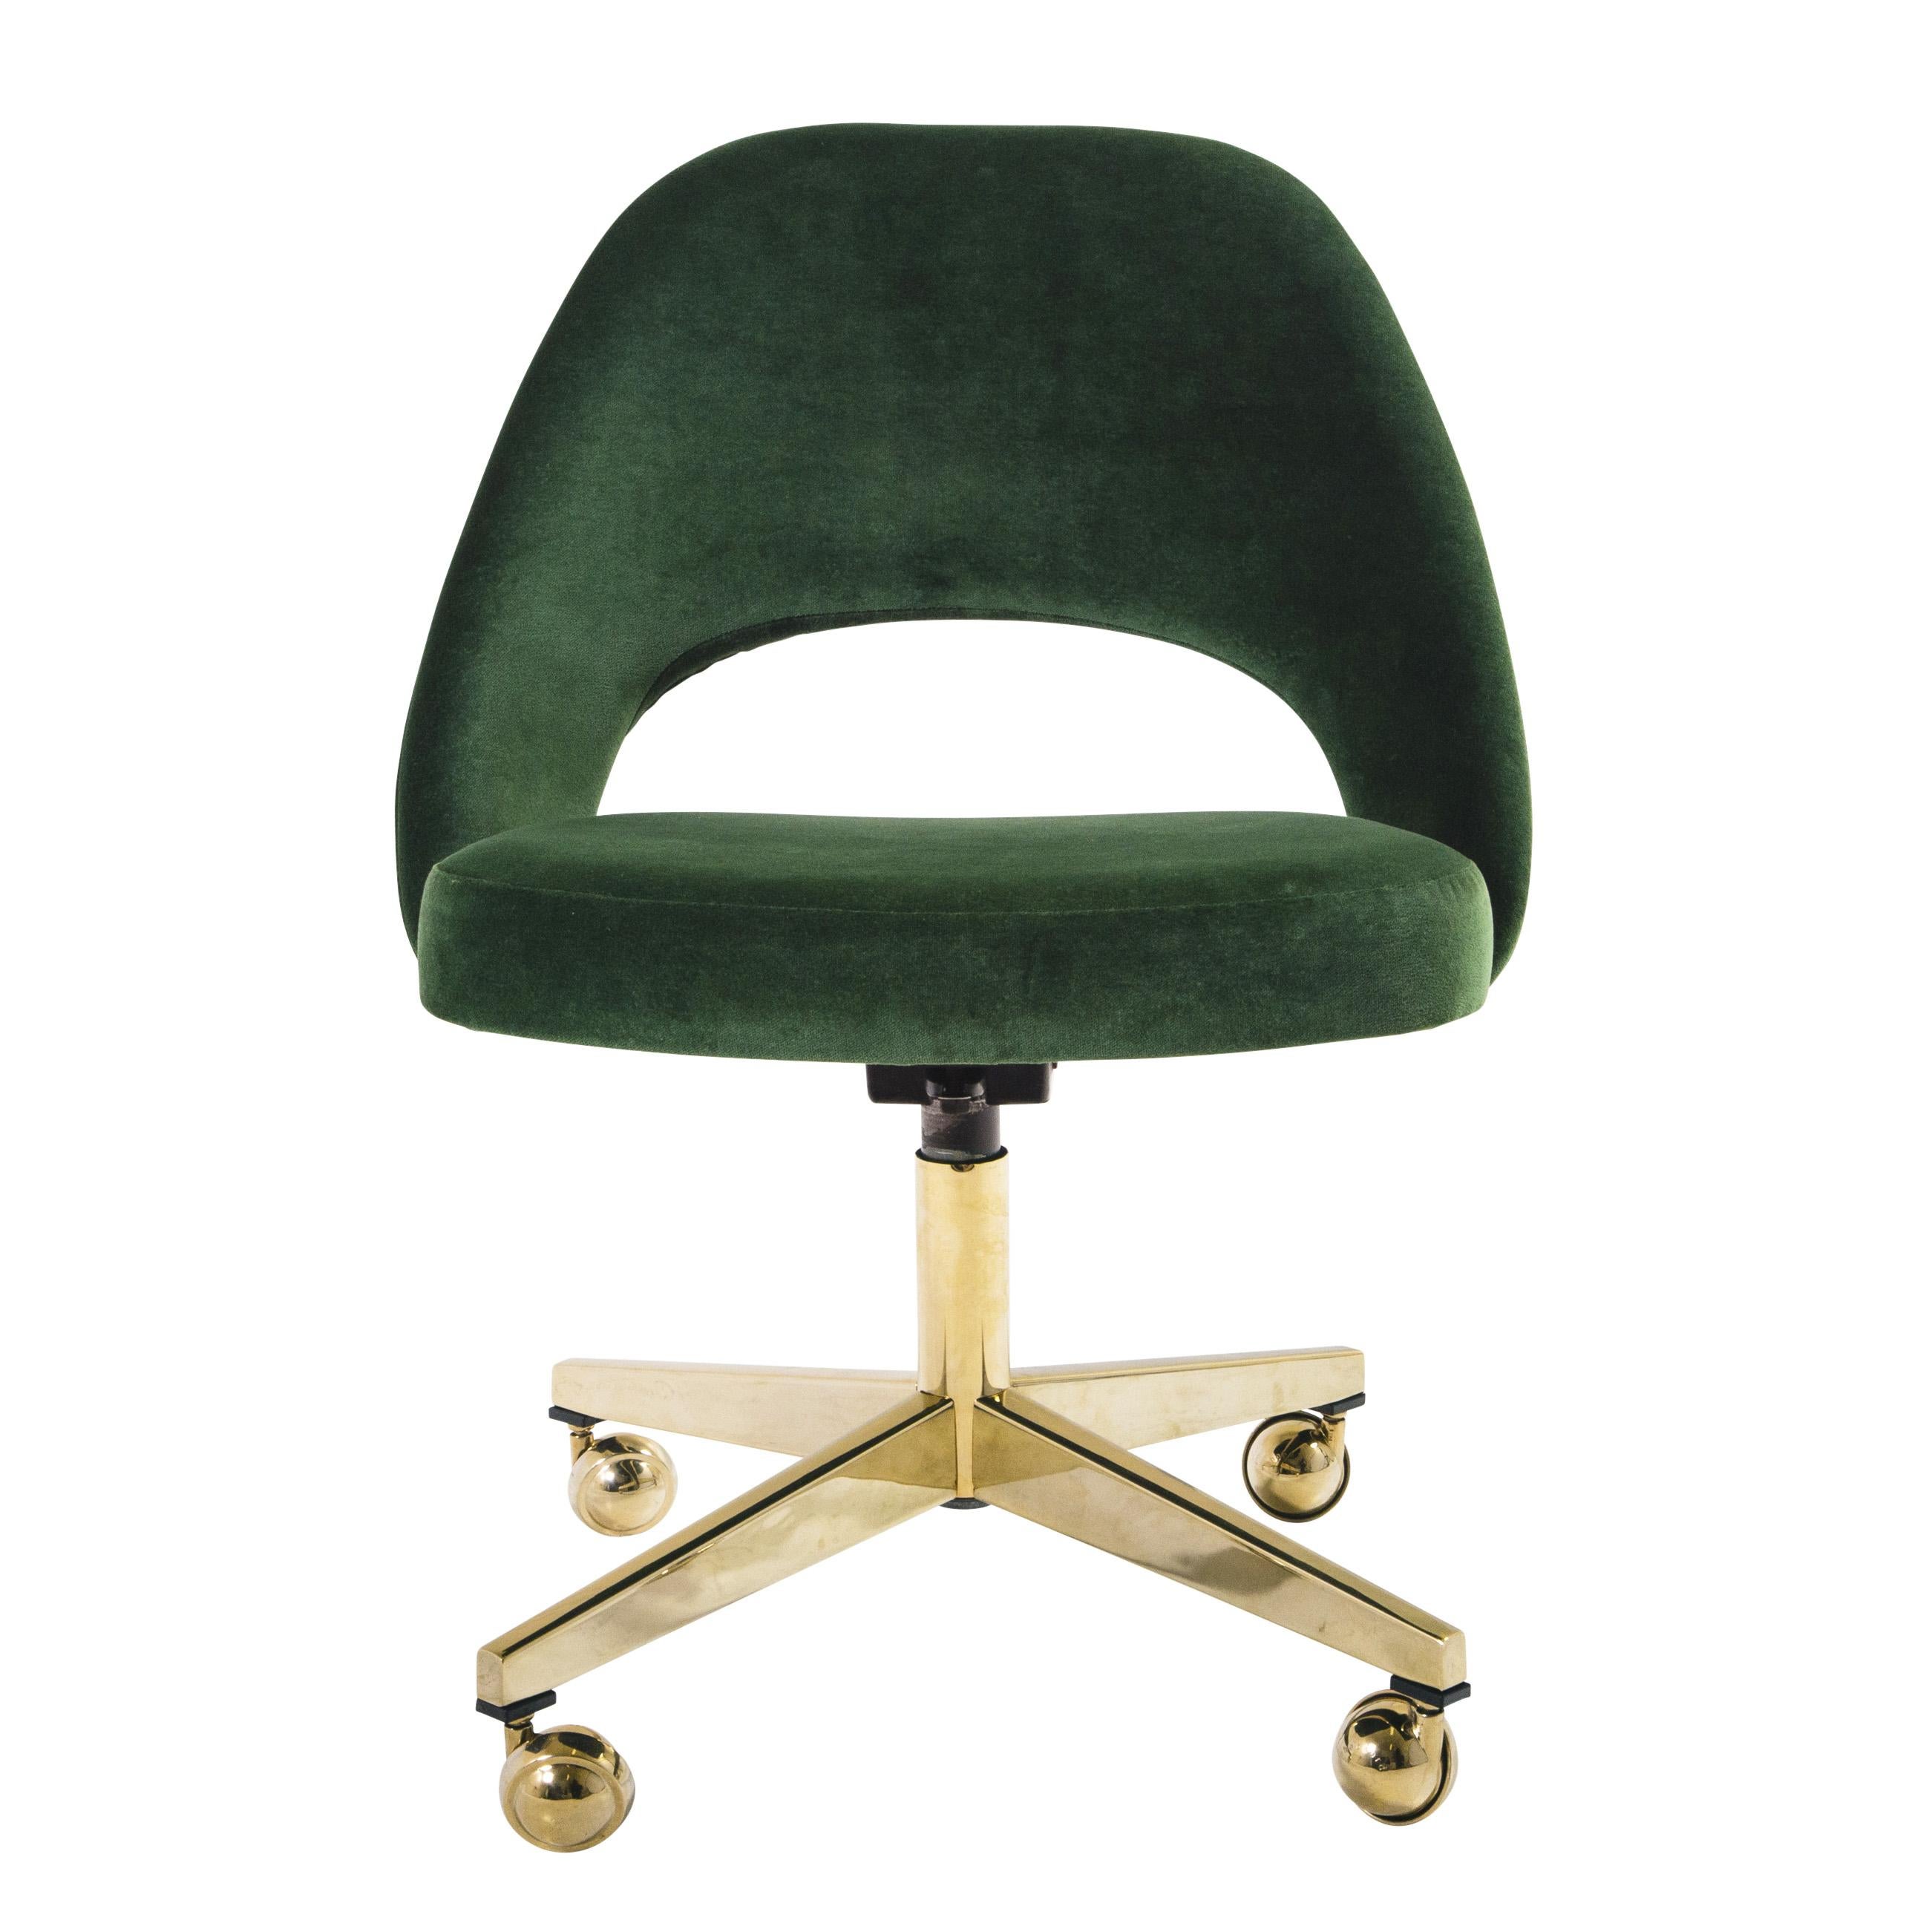 We've been restoring Saarinen executive chairs for years in every fabric one can imagine, right in our very own workroom. We’ve restored these vintage chairs using an elegant Italian Velvet in the color Emerald Green. Skilled craftsmen bring each